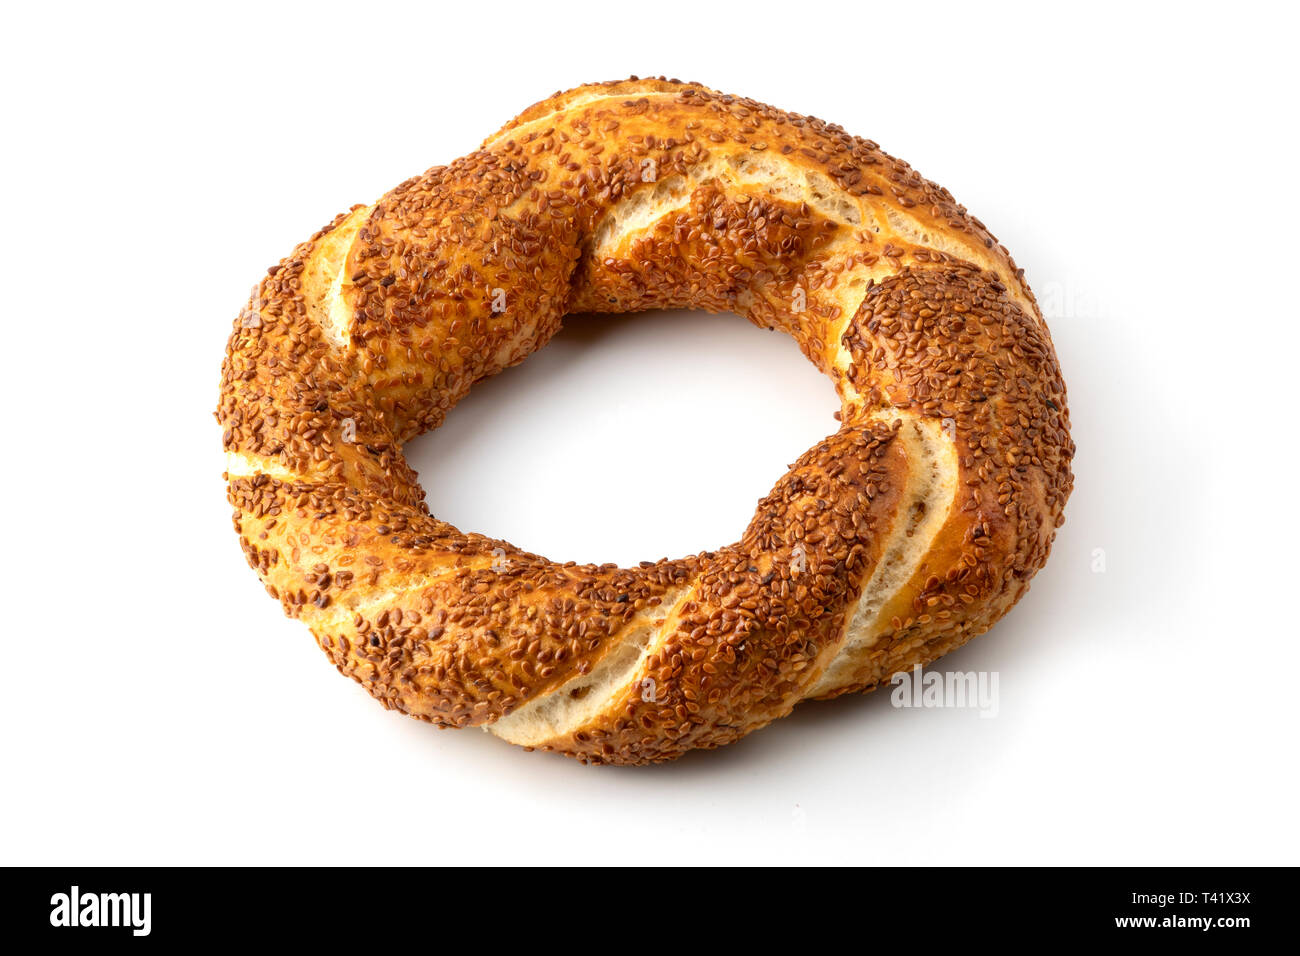 Simit, widely know as turkish bagel, on a white background Stock Photo